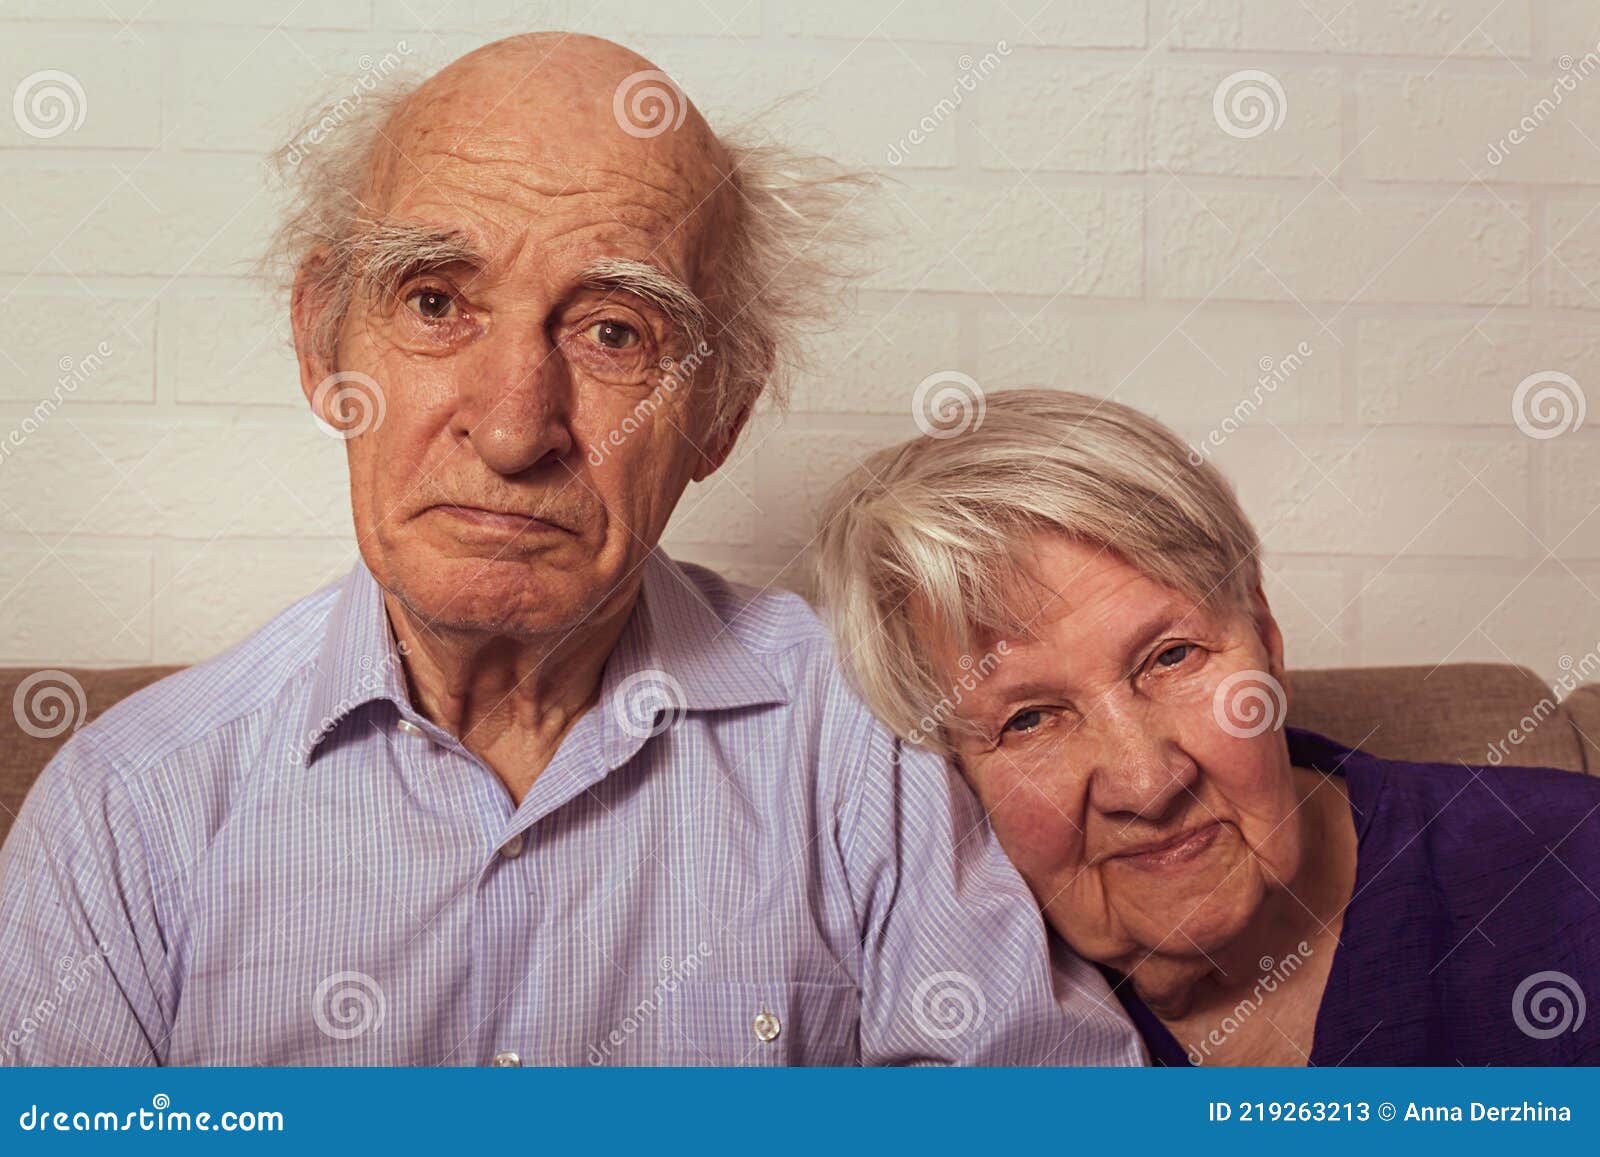 Grandma And Grandpa Cuddling Together On Couch Stock Image Image Of